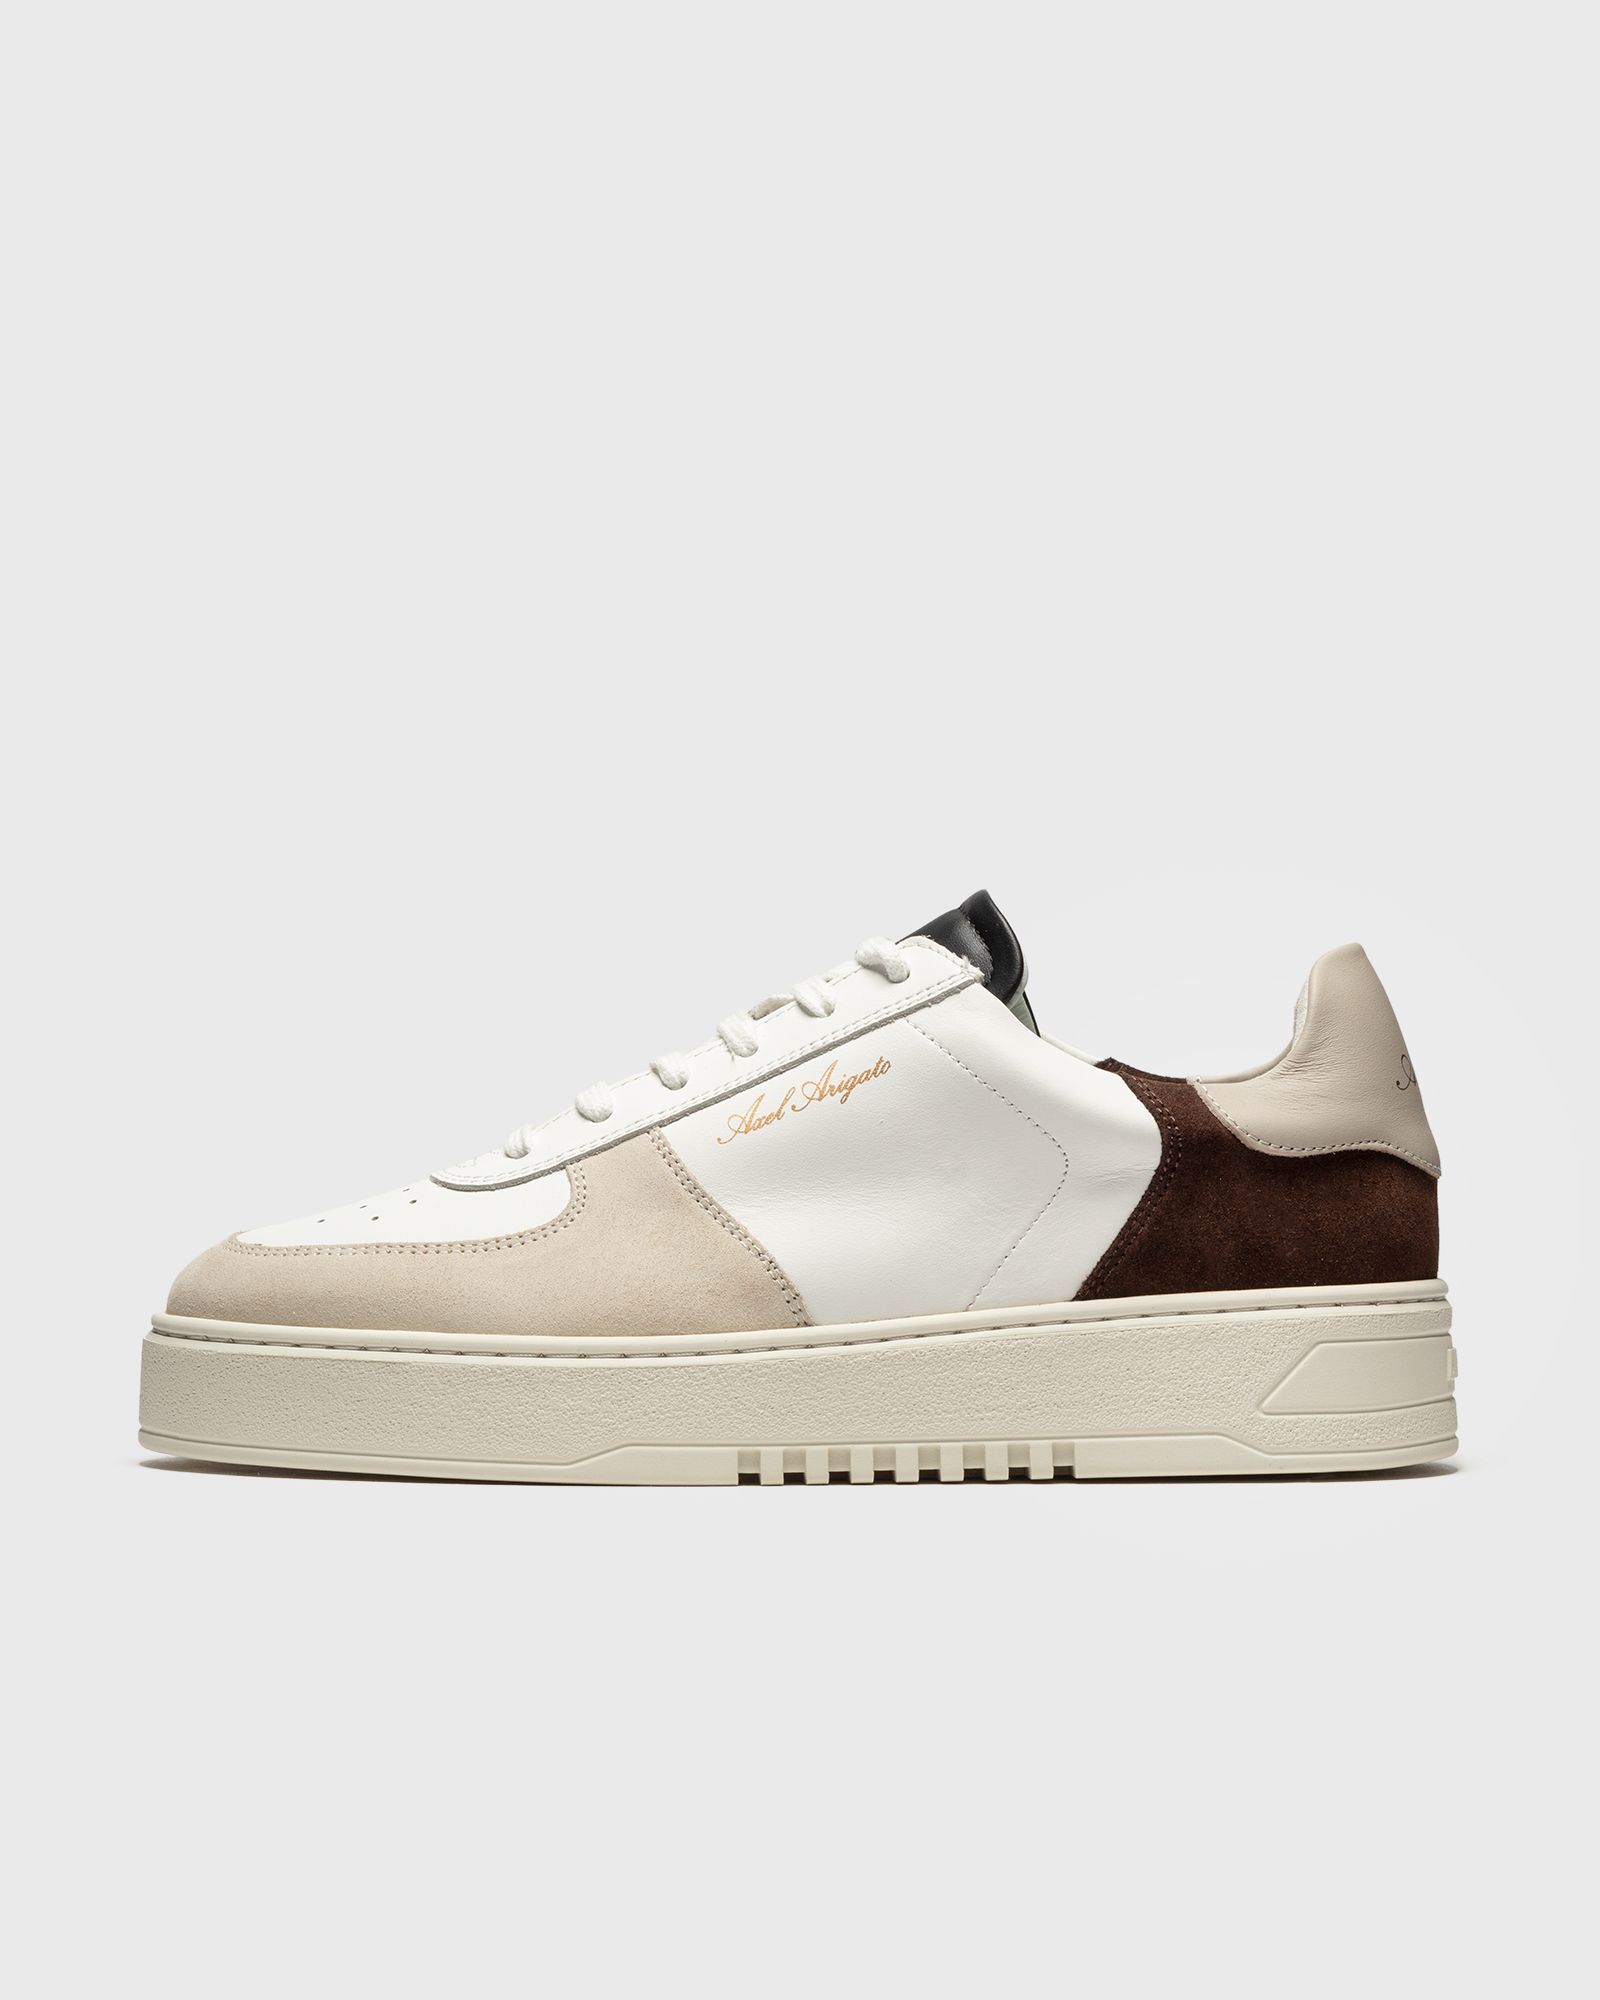 Shop Now For Axel Arigato Orbit Sneaker White/Brown men Sneakers now at in size US 9,0 | Earth Shop